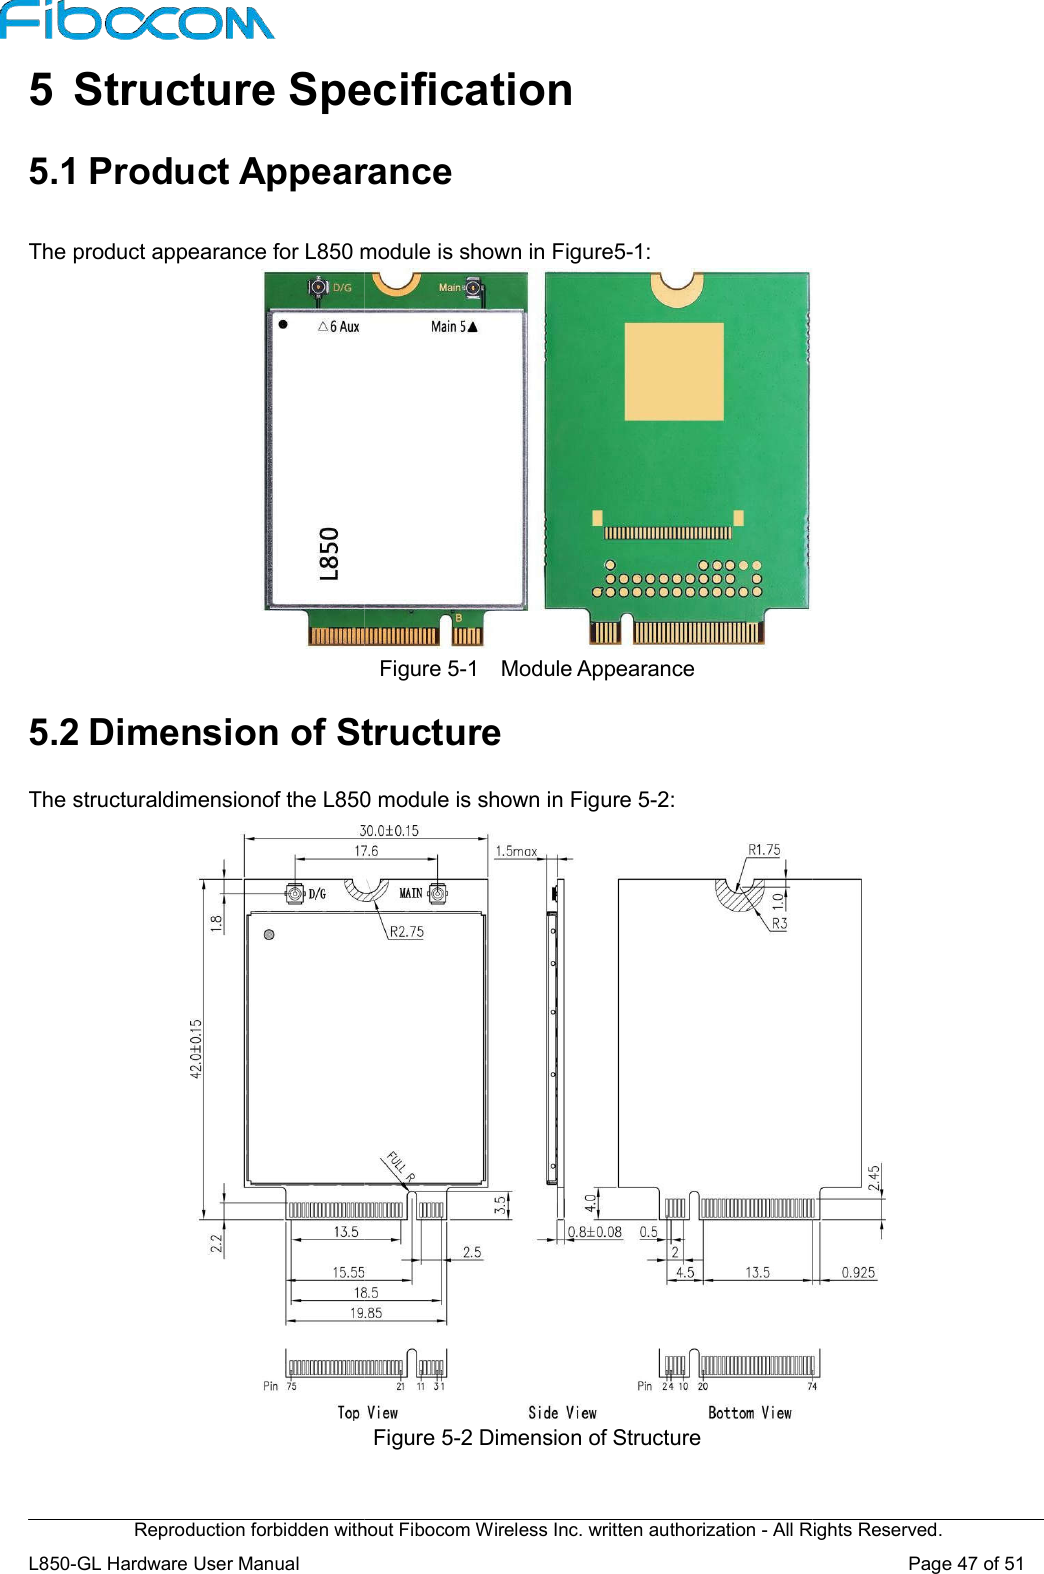 Reproduction forbidden without Fibocom Wireless Inc. written authorization L850-GL Hardware User Manual    5  Structure Specification5.1 Product Appearance The product appearance for L850 module is shown in Figure5 5.2 Dimension of StructureThe structuraldimensionof the L850 module is shown in Figure 5Reproduction forbidden without Fibocom Wireless Inc. written authorization - All Rights Reserved.Specification Appearance The product appearance for L850 module is shown in Figure5-1: Figure 5-1  Module Appearance Structure The structuraldimensionof the L850 module is shown in Figure 5-2: Figure 5-2 Dimension of Structure All Rights Reserved. Page 47 of 51 